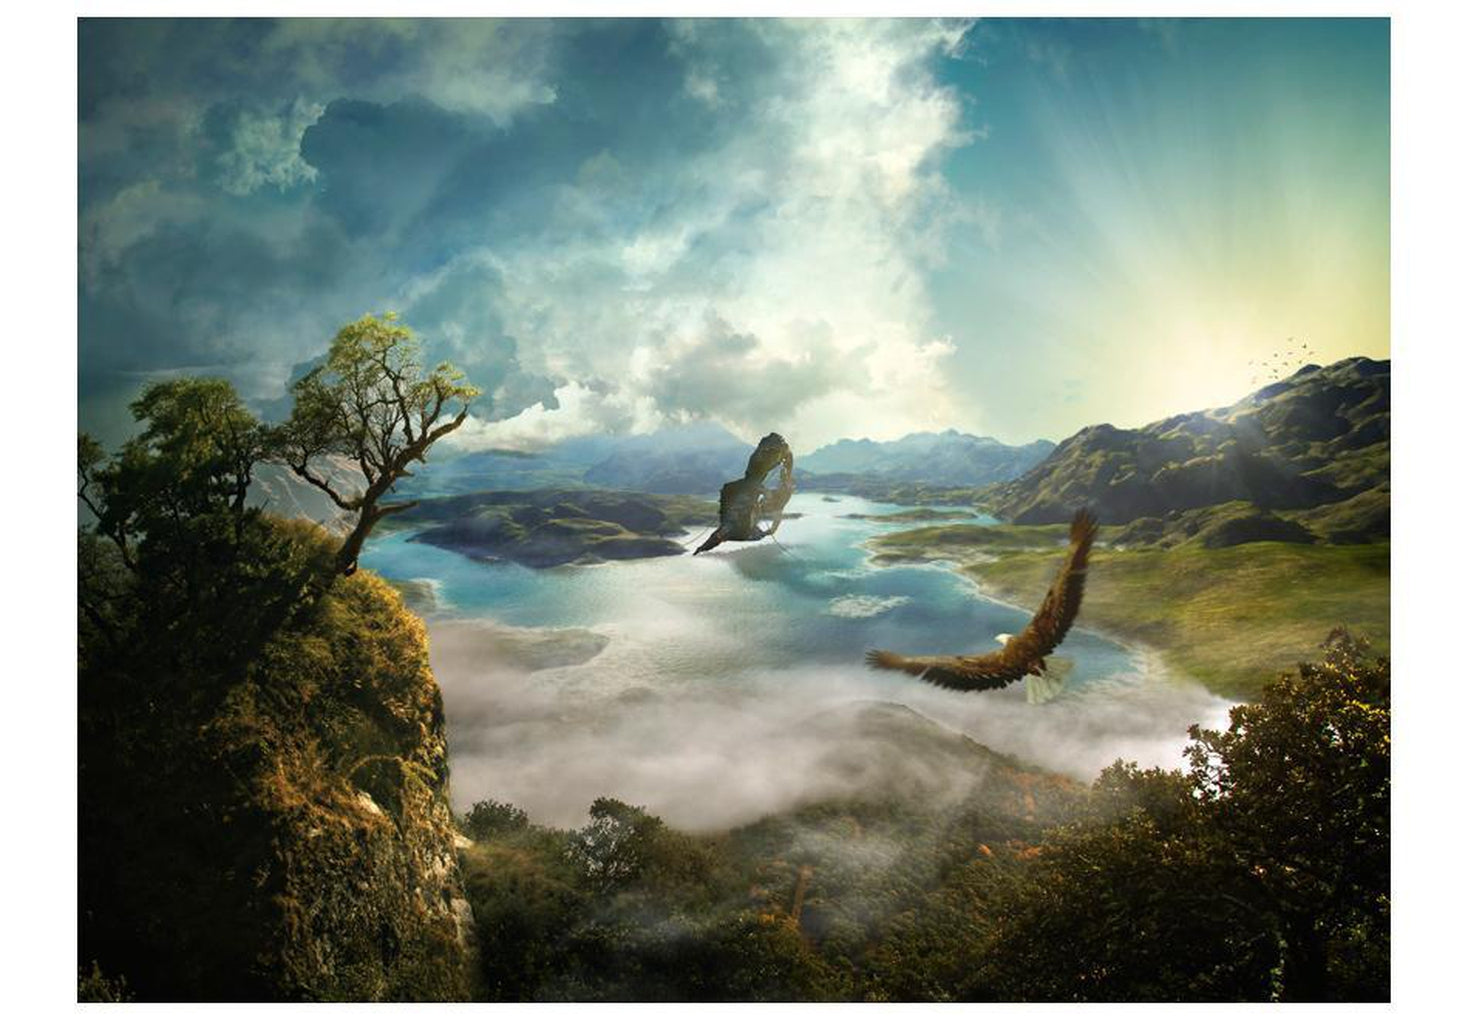 Wall mural - The flight over the lake-TipTopHomeDecor